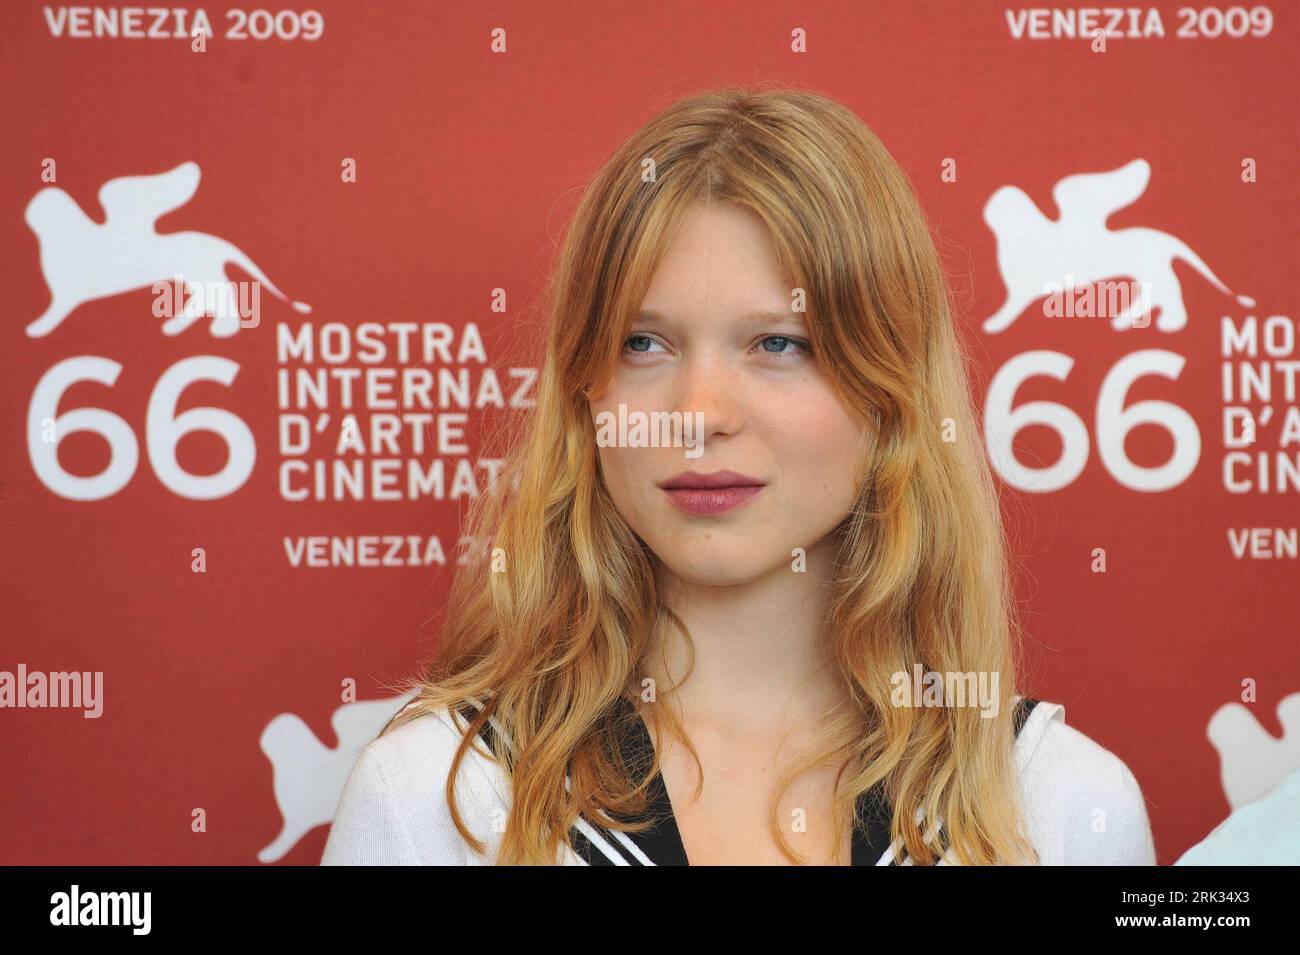 Léa Seydoux Has That French Allure (PHOTO)